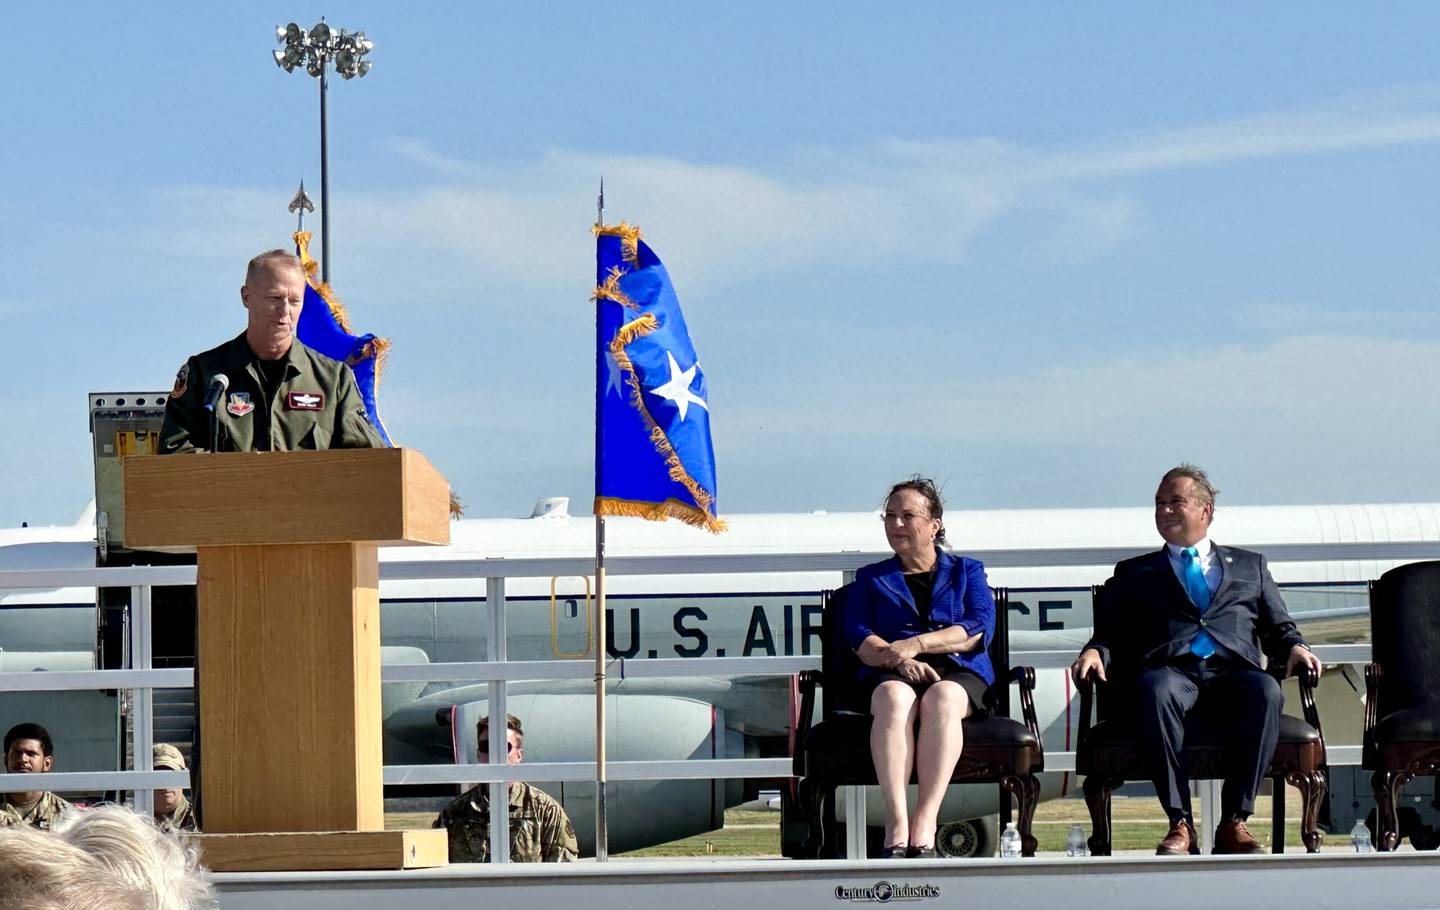 Air Force Gen. Mark Kelly, commander of Air Combat Command, addresses a crowd of more than 150 people at a ceremony marking the opening of a new runway at Offutt Air Force Base on Sept. 30, 2022.